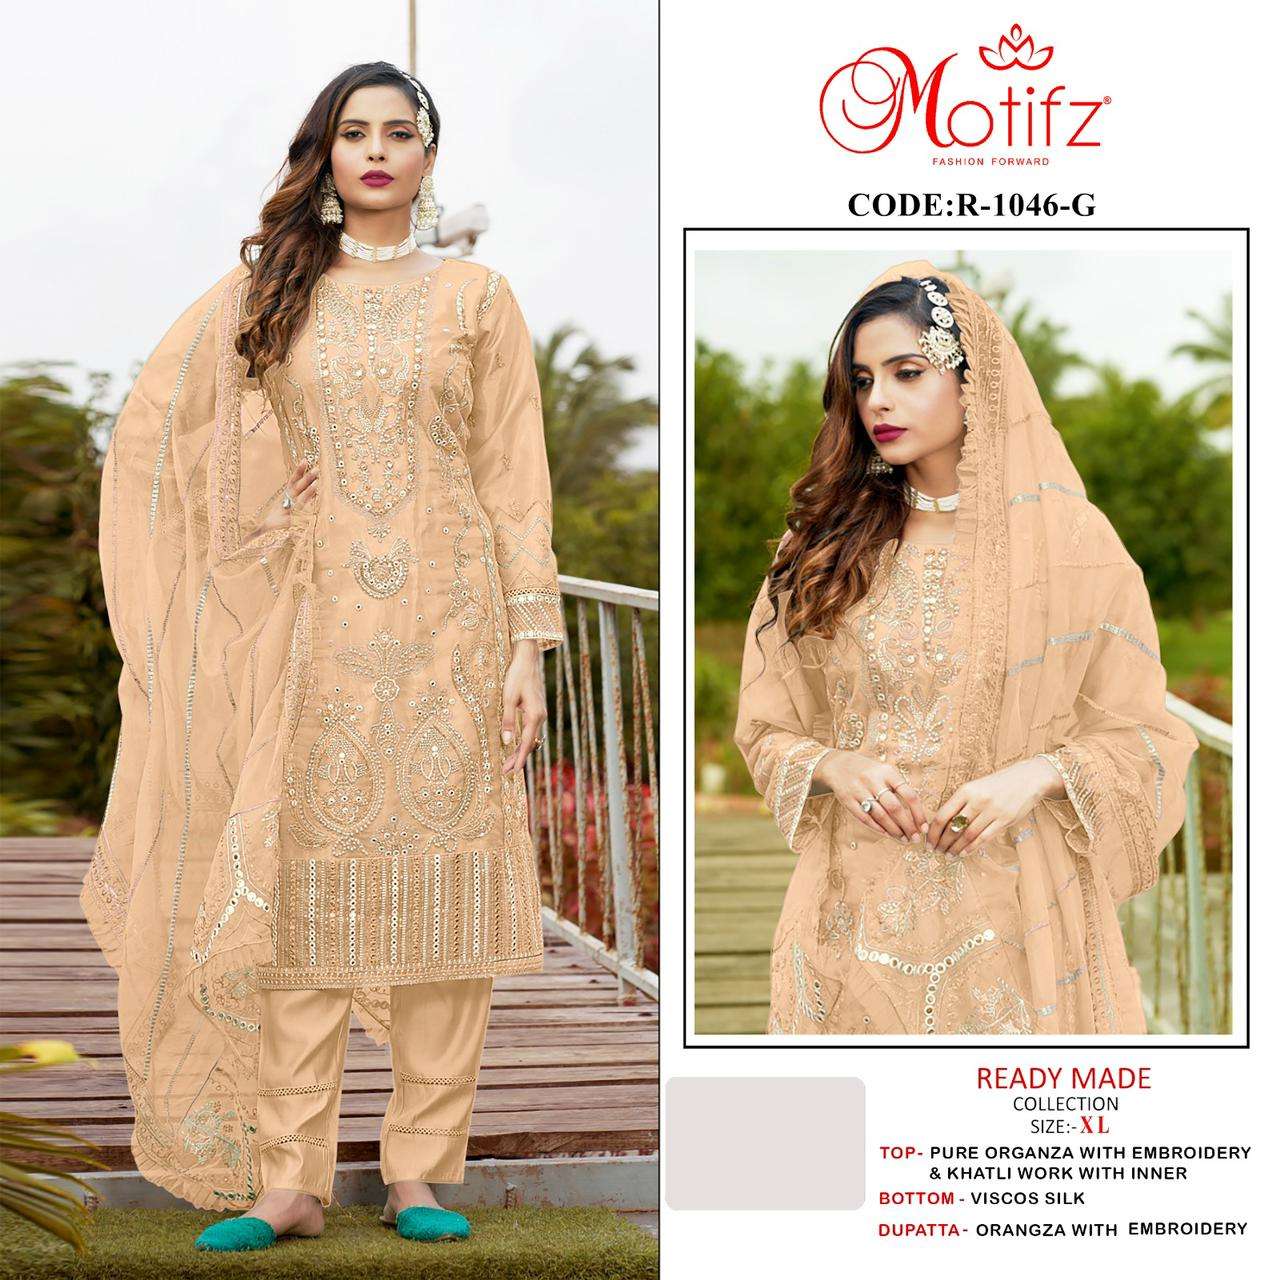 Motifz 1046 Pure orgnaza with embroidery & khalti work with inner Salwar Kameez Wholesale catalog